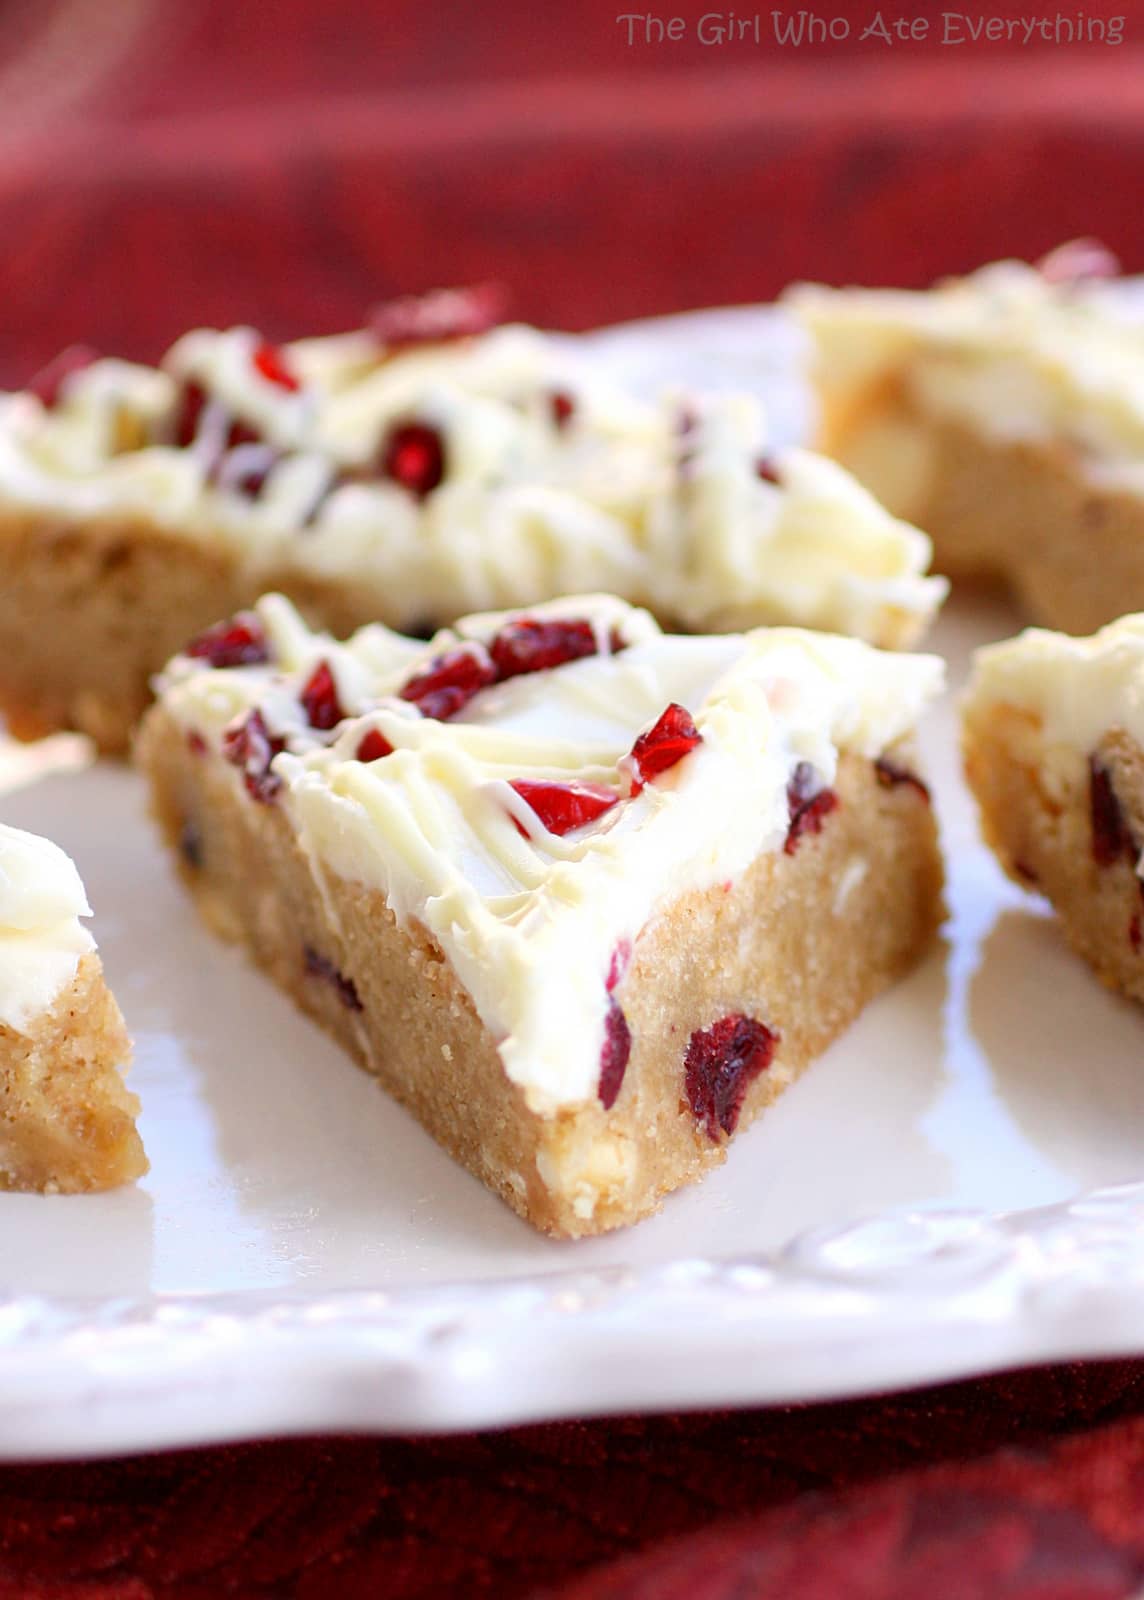 Cranberry Bliss Bars - a knockoff of the Starbuck's treat. A blondie dotted with white chocolate and cranberries with a slight hint of orange. the-girl-who-ate-everything.com 